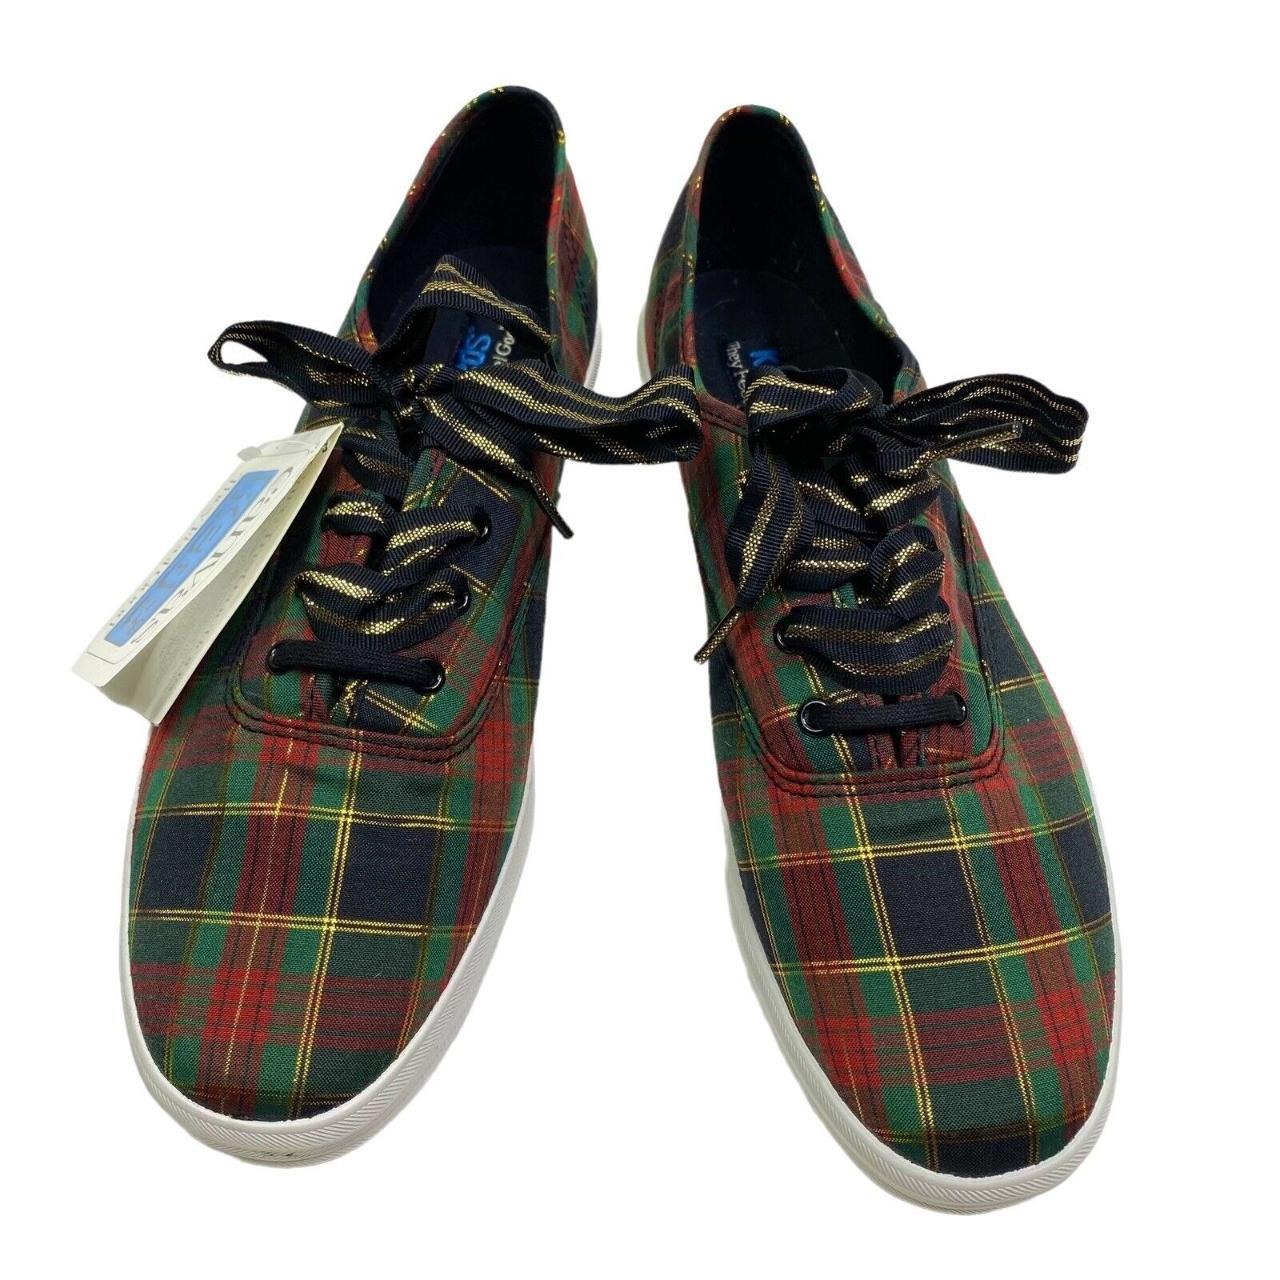 Product Image 2 - vintage keds sneakers 1993 New